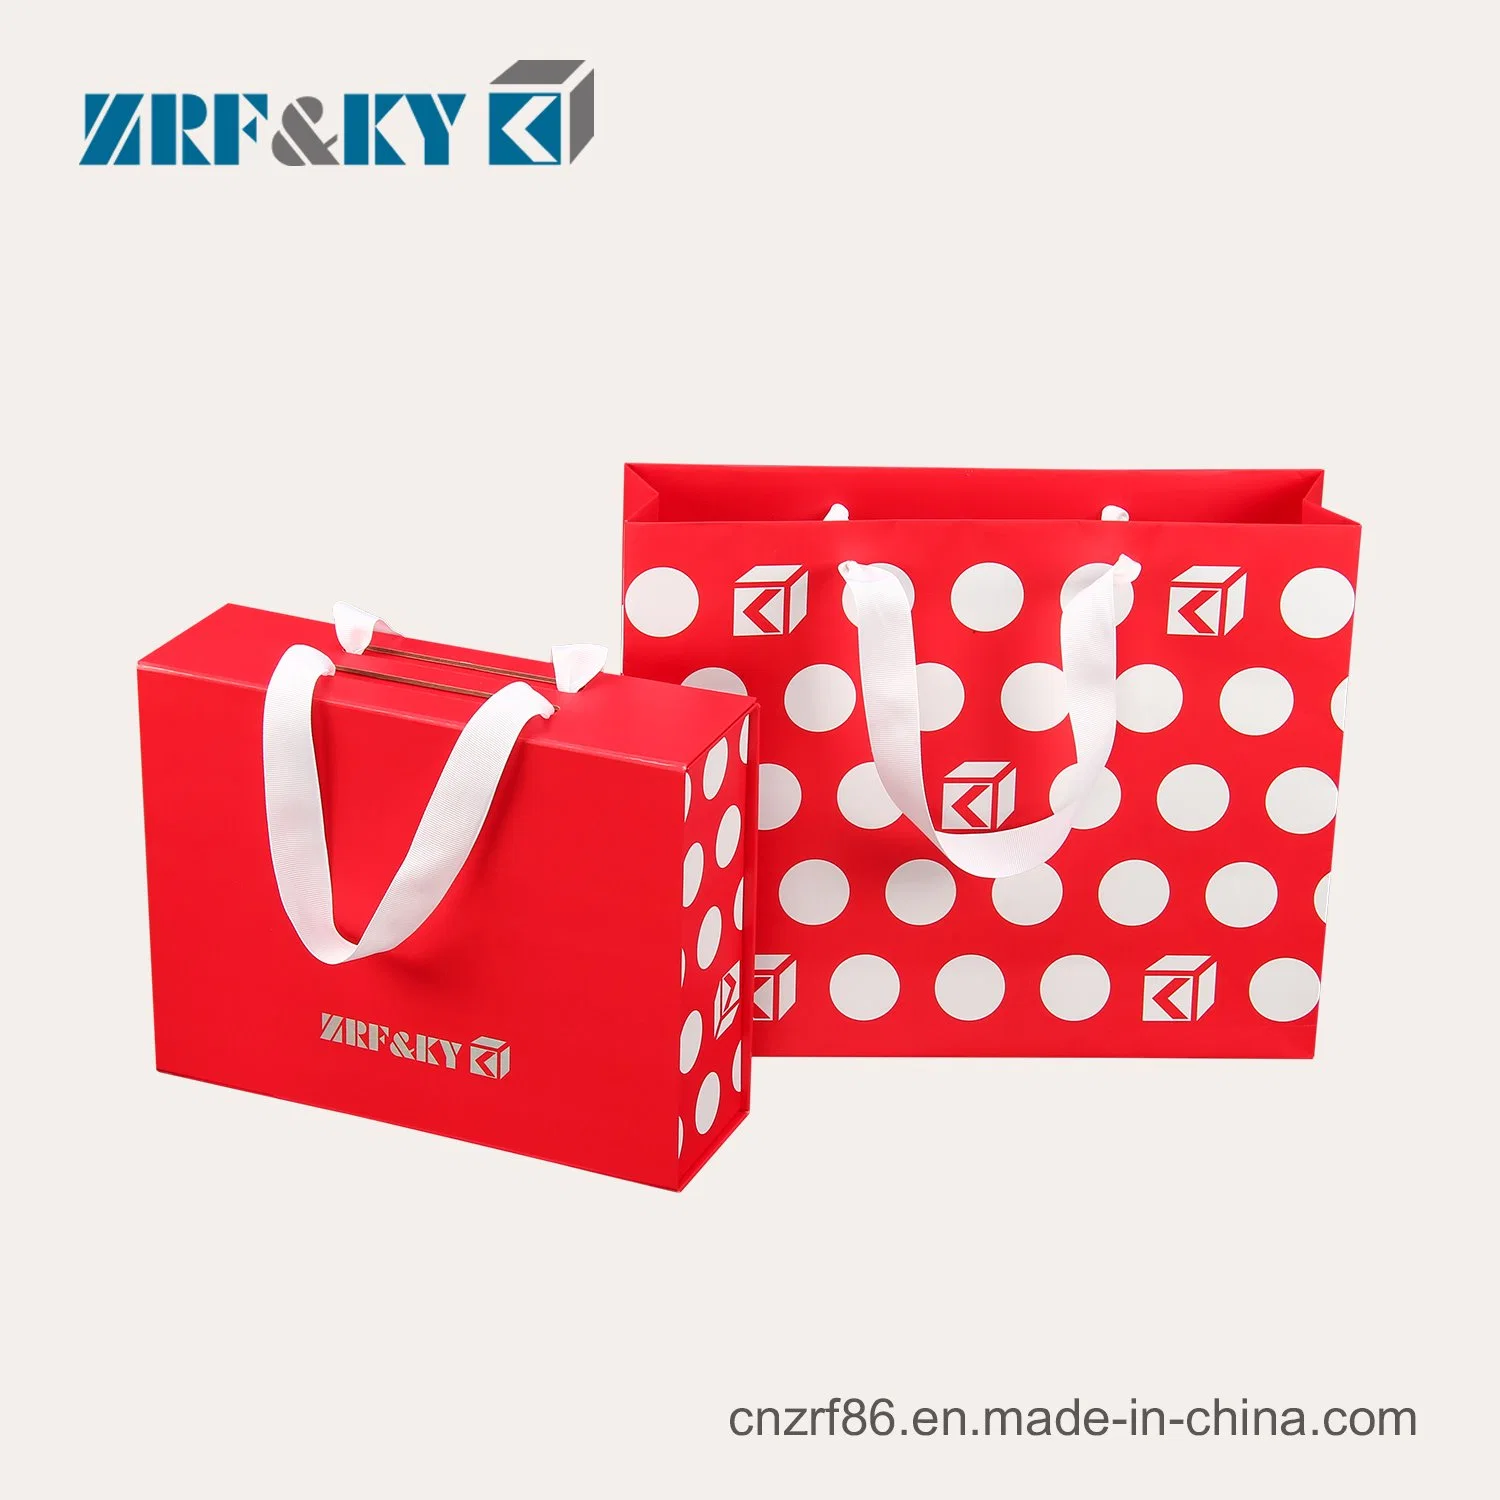 Wholesale/Customized Recyclable Gift/Shopping/Carrier/Wedding Packaging Art/Kraft/Coated Paper Bags with Ribbon Handles